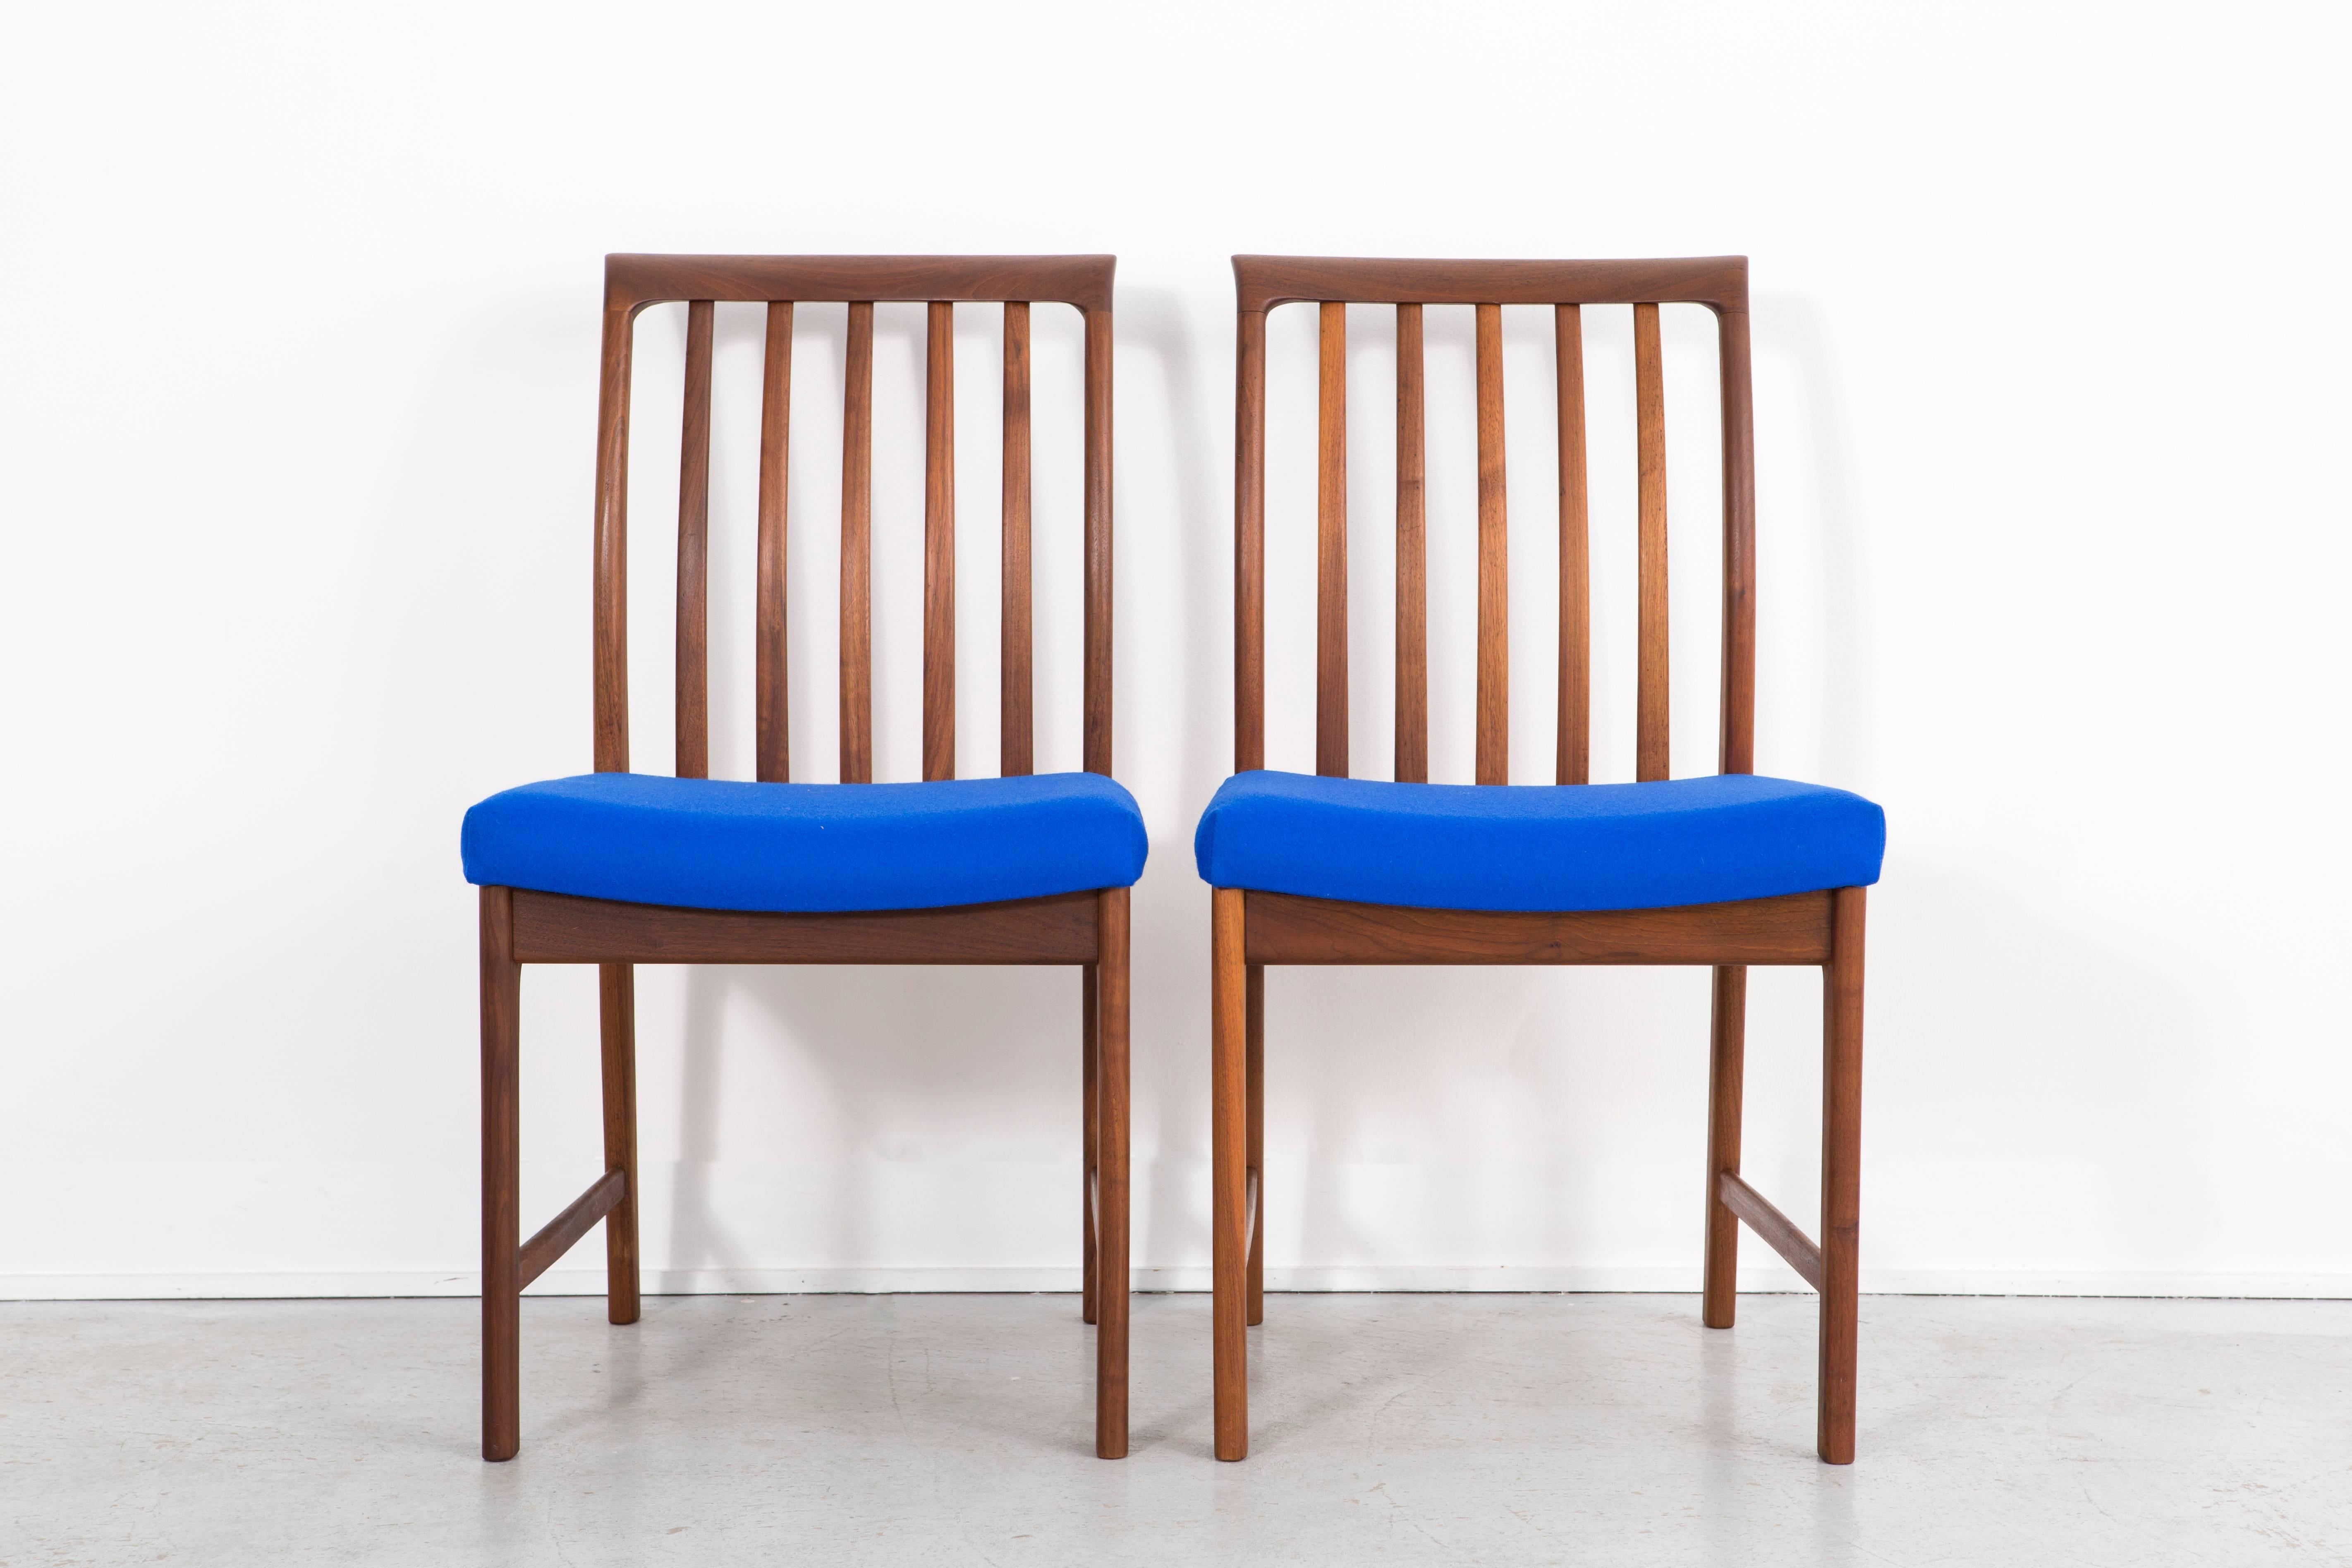 Set of ten dining chairs

by DUX

Sweden, circa 1960s

Teak and reupholstered in Maharam wool

Measures: 34 ?” H x 19 ?” W x 20 ½” D x seat 17 ¼” D (with arms)

36 ?” H x 24 7/16” W x 24 ?” D x seat 18 ¼” D (armless)

Sold as a